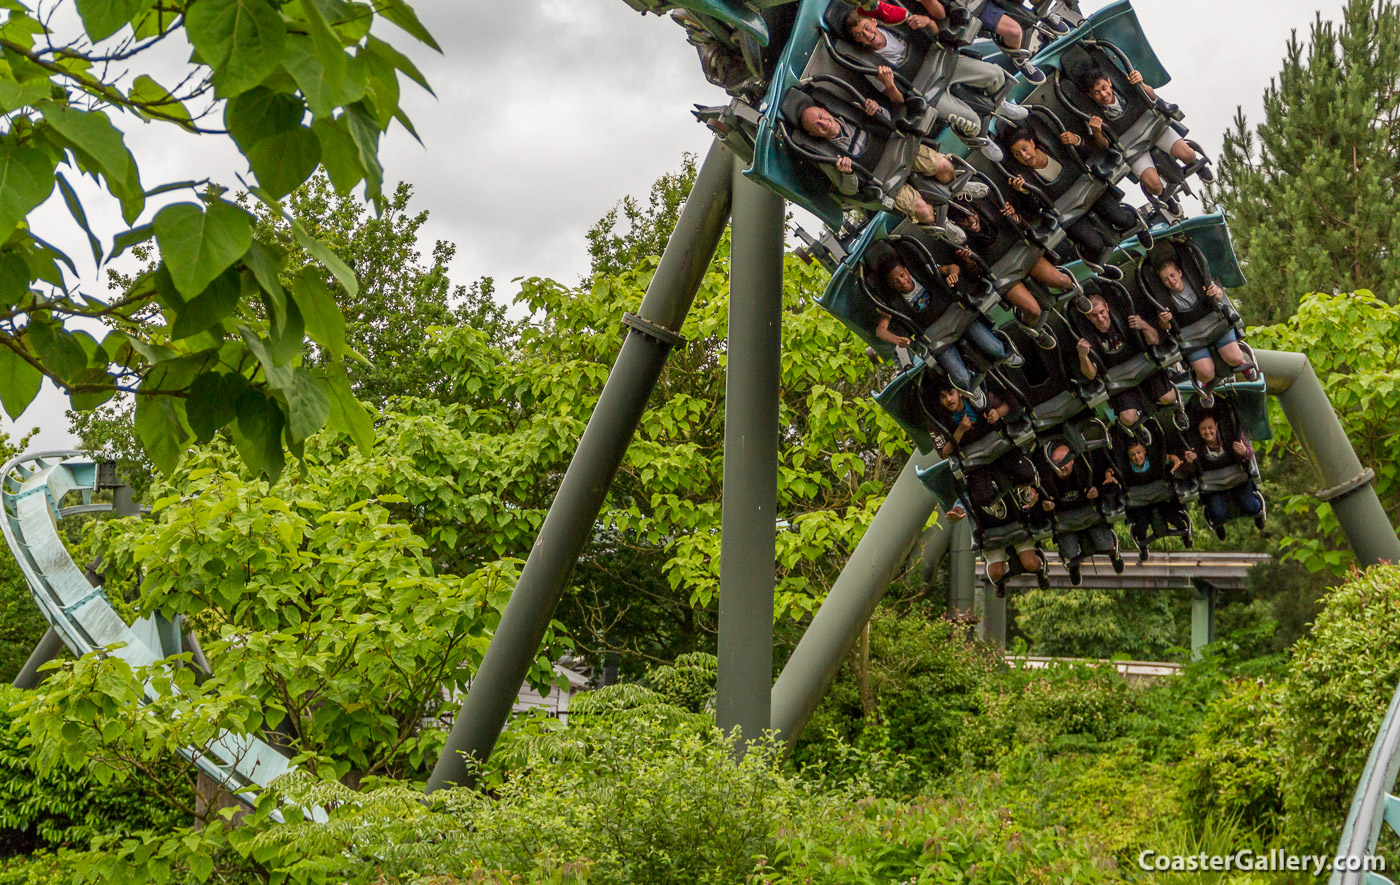 Alton Towers pictures and information